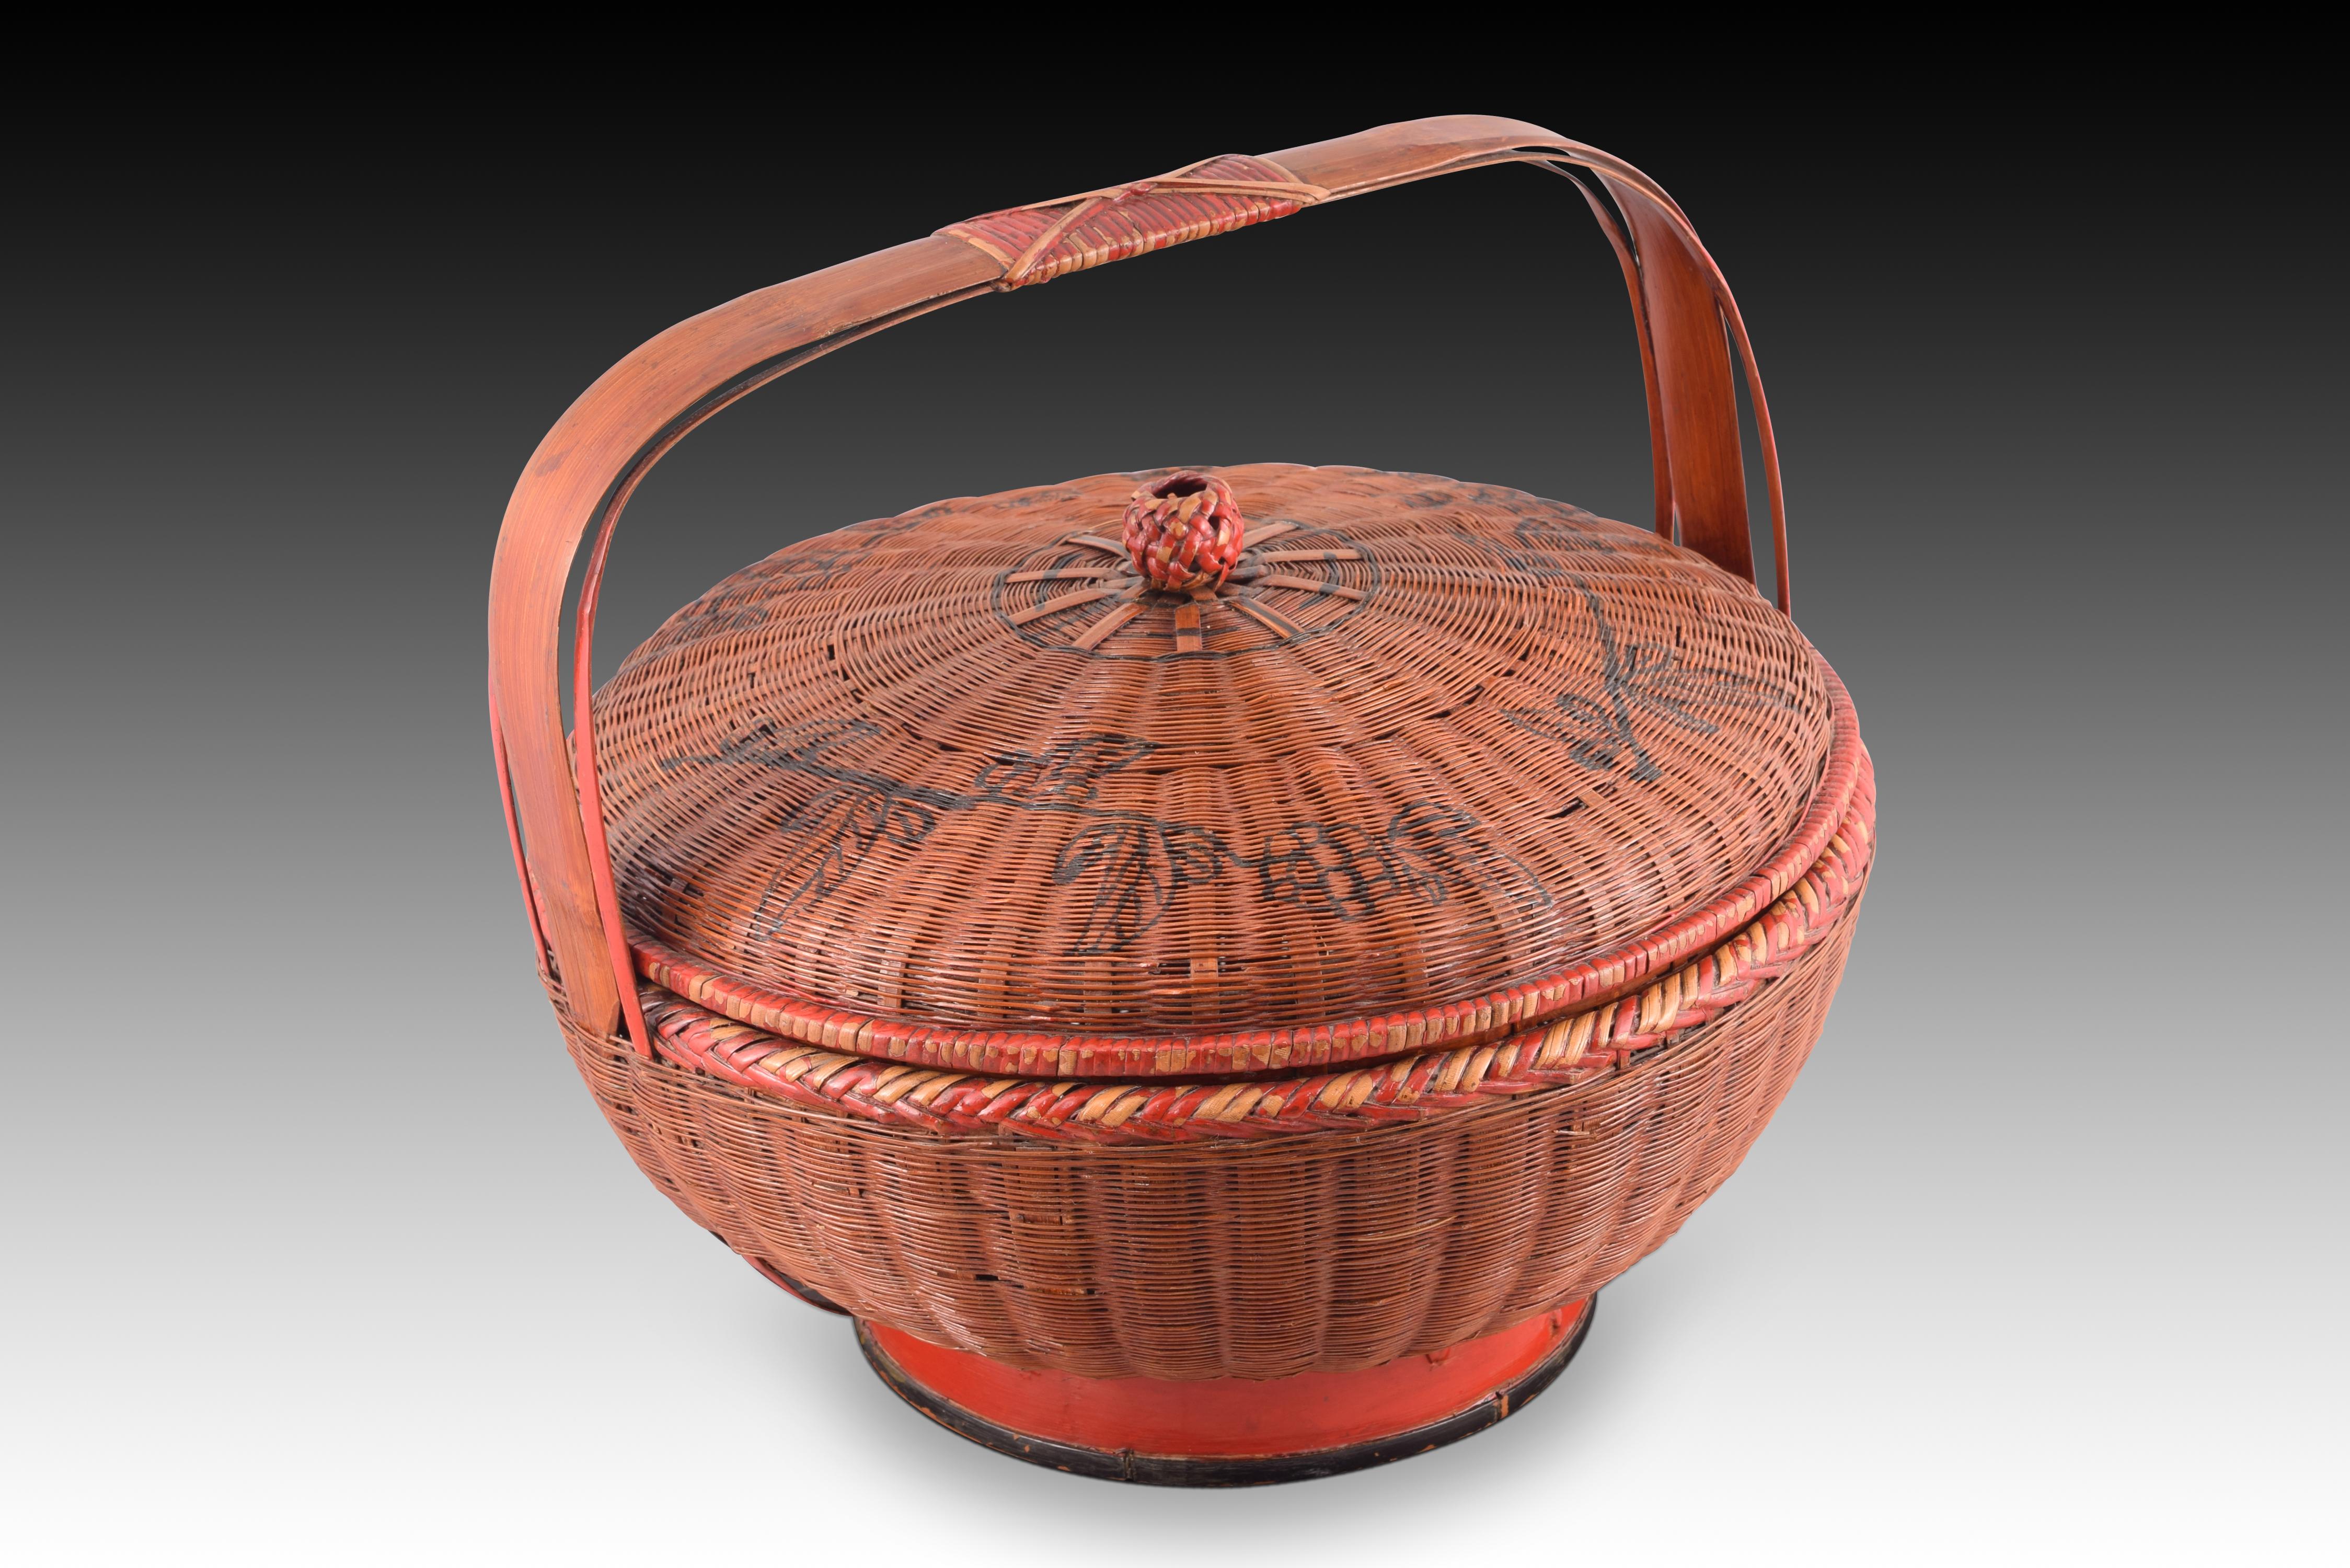 Oriental basket. 19th-20th centuries. 
Circular basket with handle decorated with elements of Chinese influence, a style that can also be related to the materials and shape of the piece. These types of objects were highly appreciated in Europe since